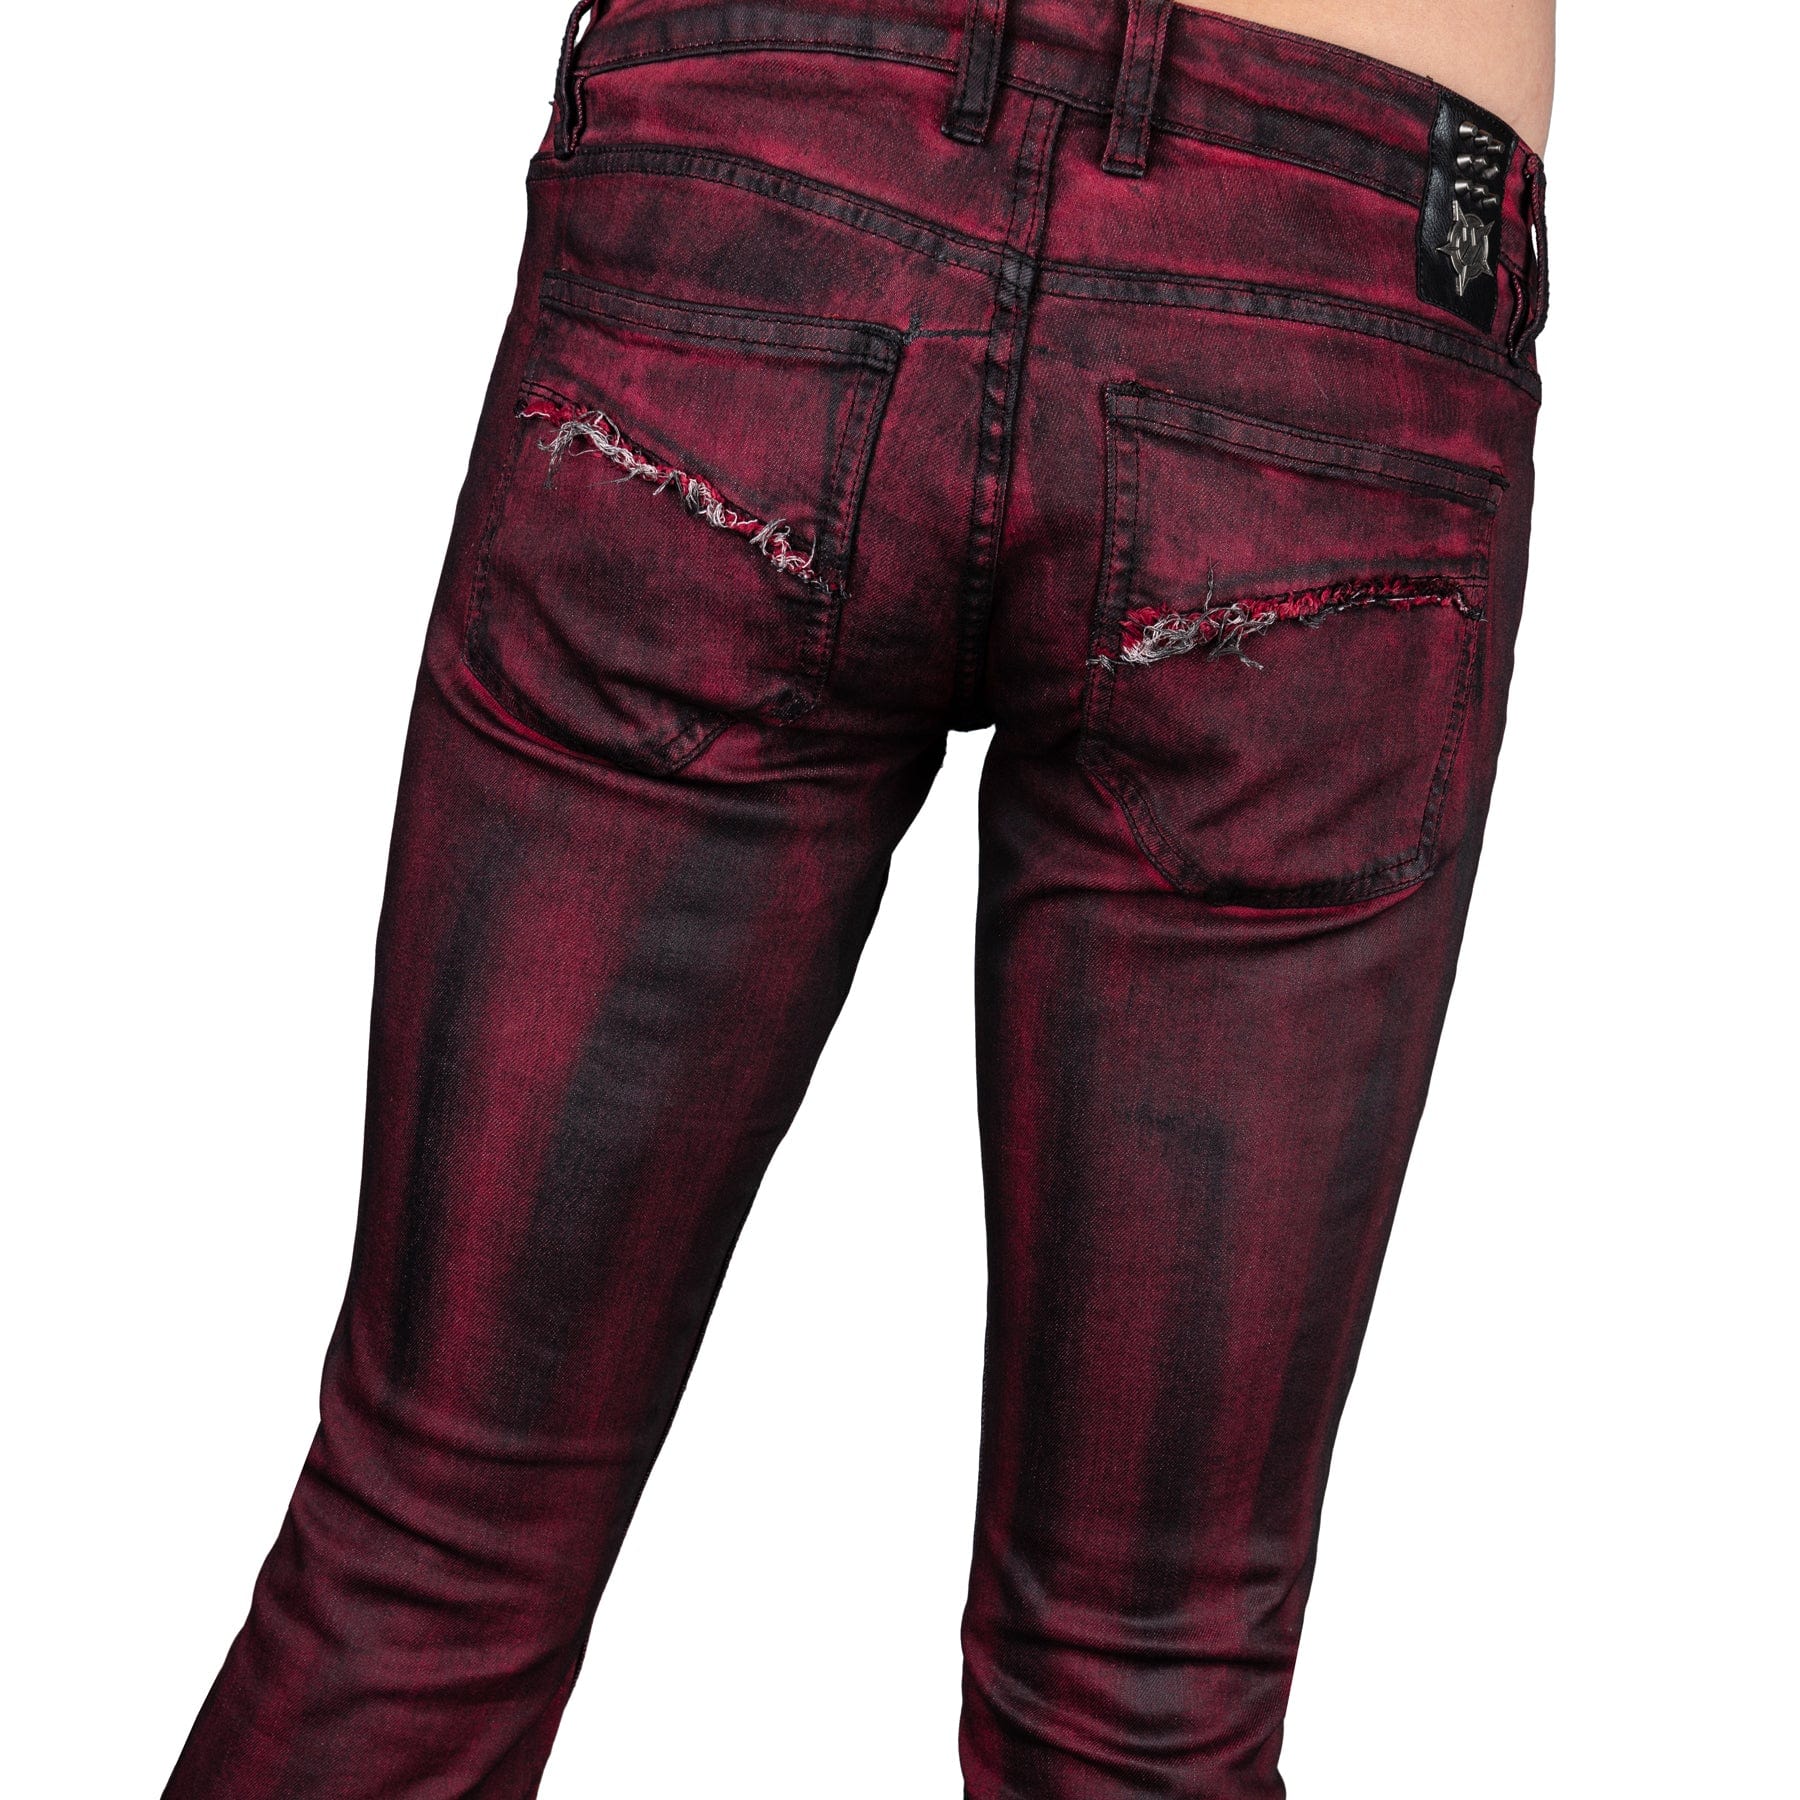 Wornstar Clothing Rampager Coated Jeans - Crimson